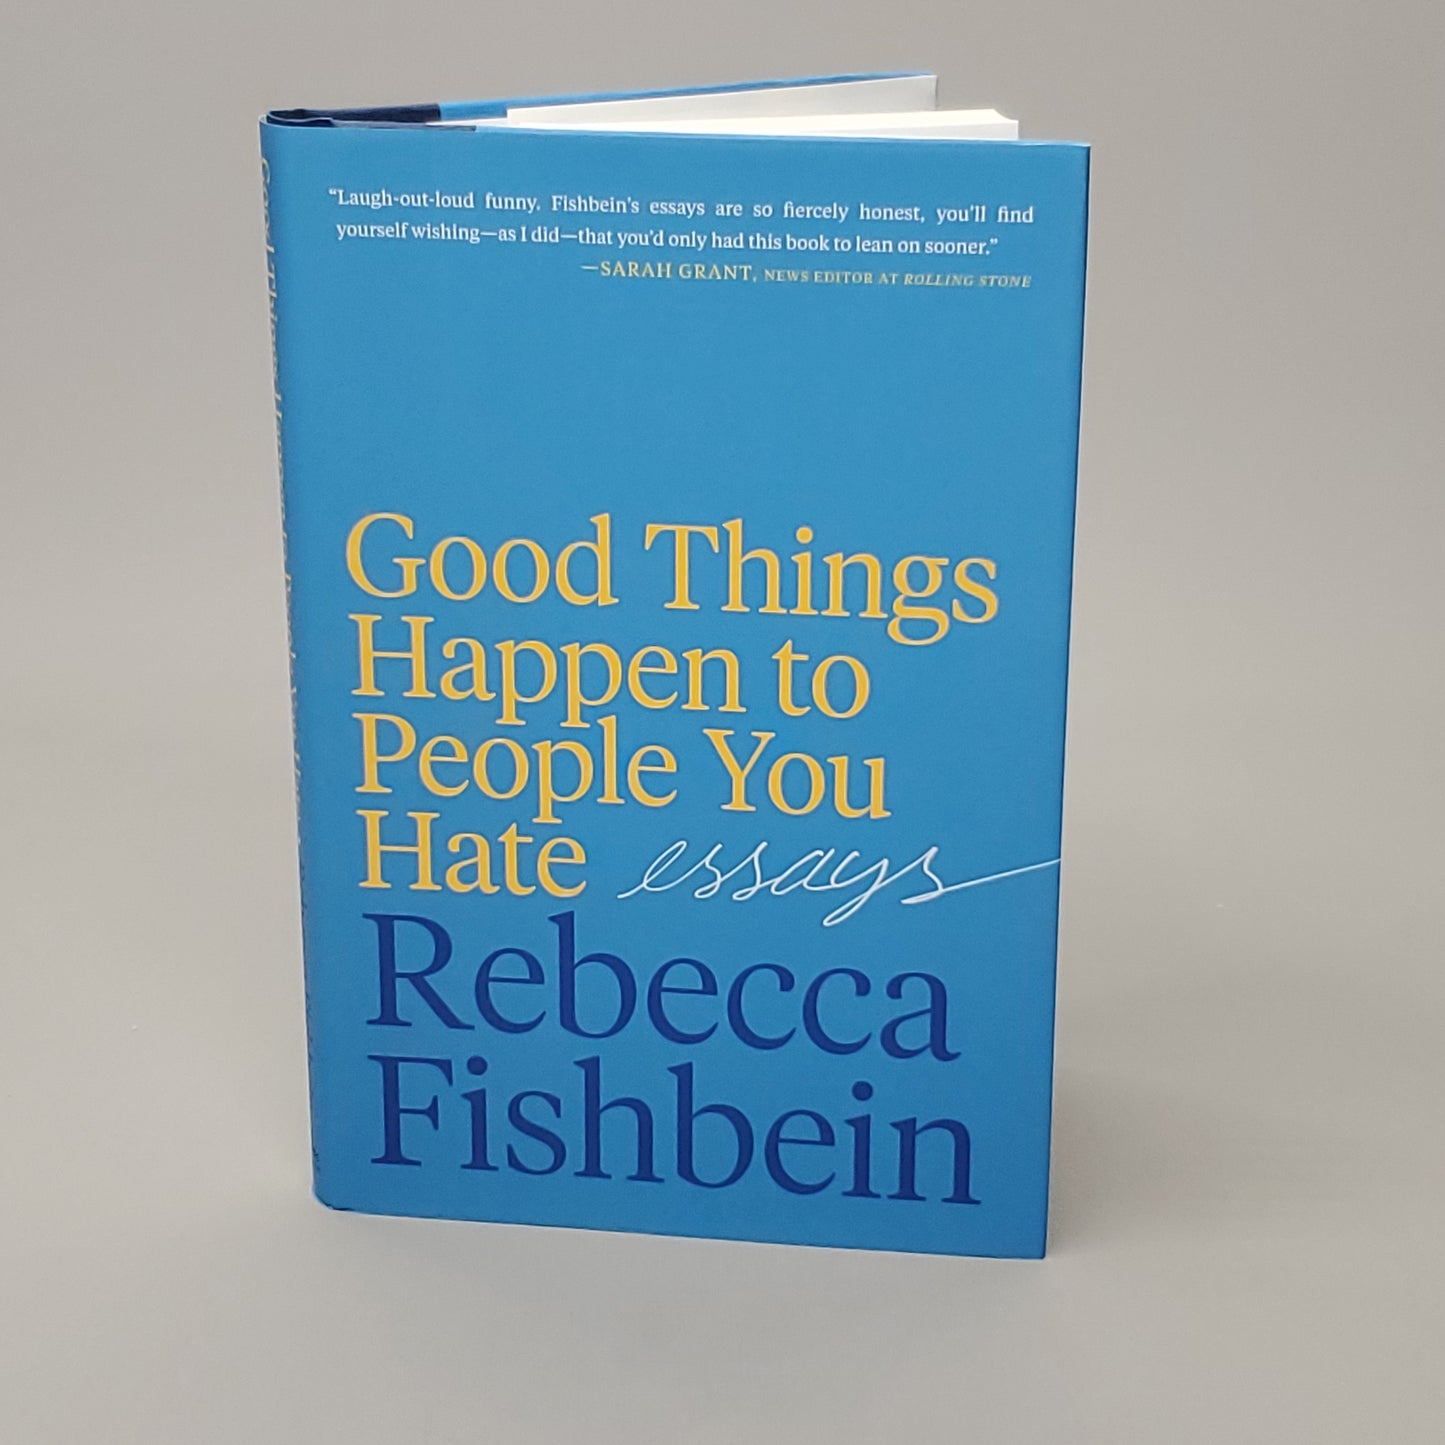 GOOD THINGS HAPPEN TO PEOPLE YOU HATE ESSAYS by Rebecca Fishbein Book Hardcover (New)